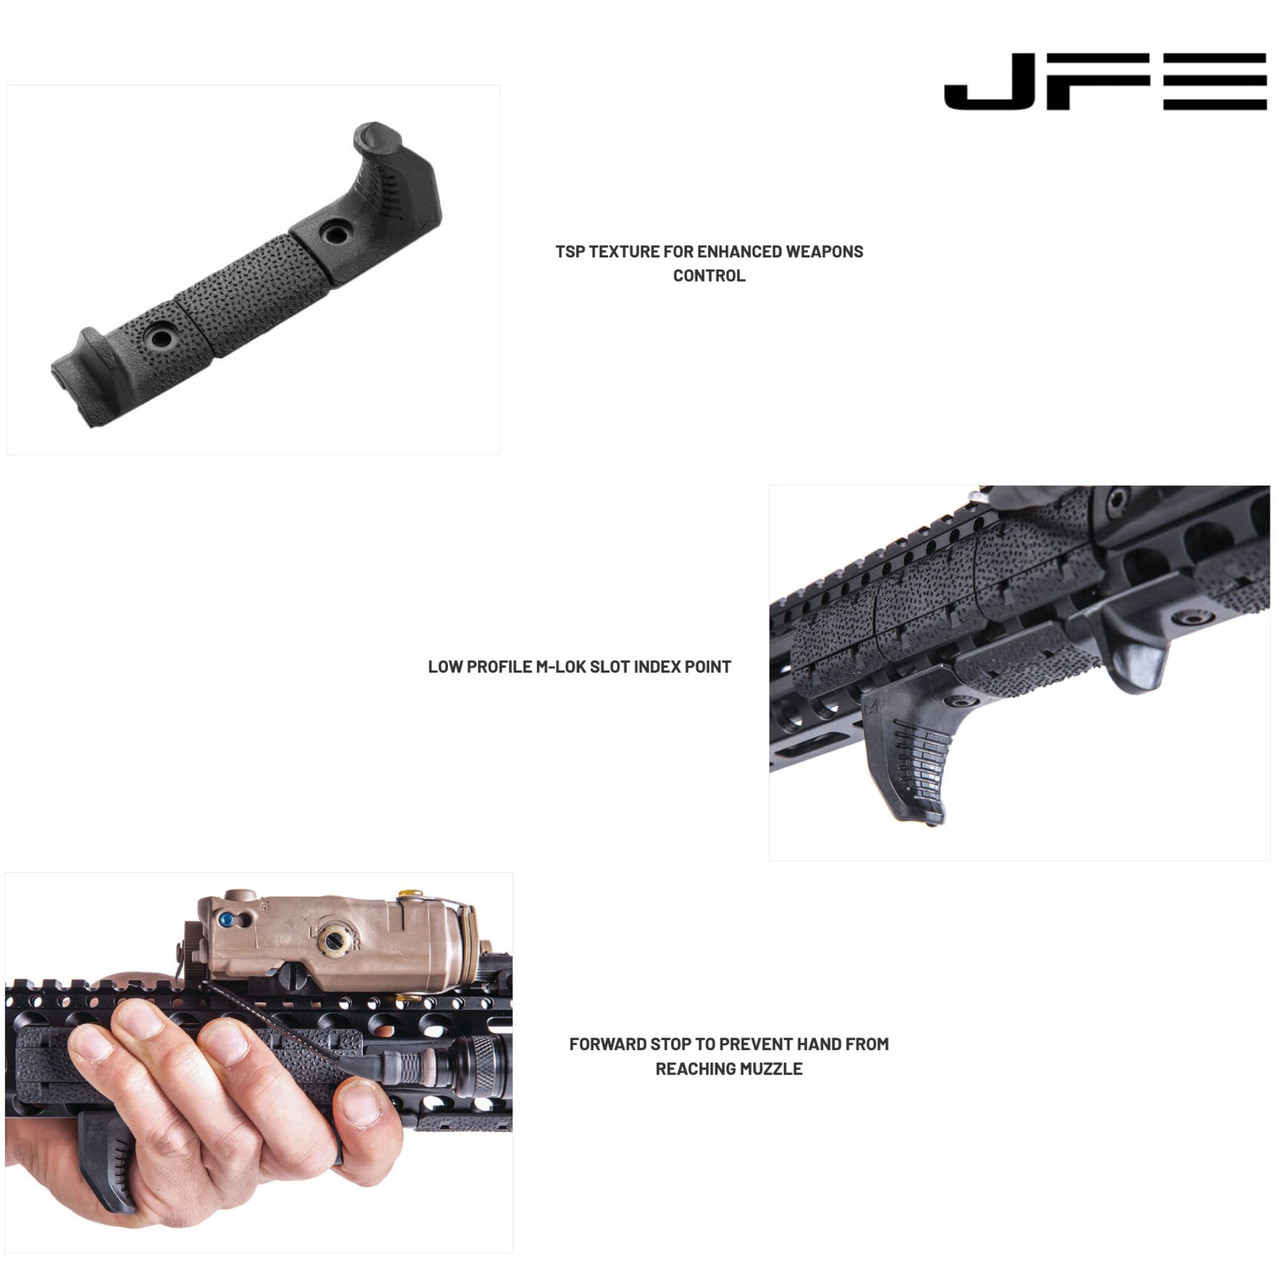 https://cdn11.bigcommerce.com/s-ph8cutvdkm/images/stencil/1280x1280/products/841/2670/JFE_Complete_Polymer_Pistol_Coating-8__31712.1695745789.jpg?c=2